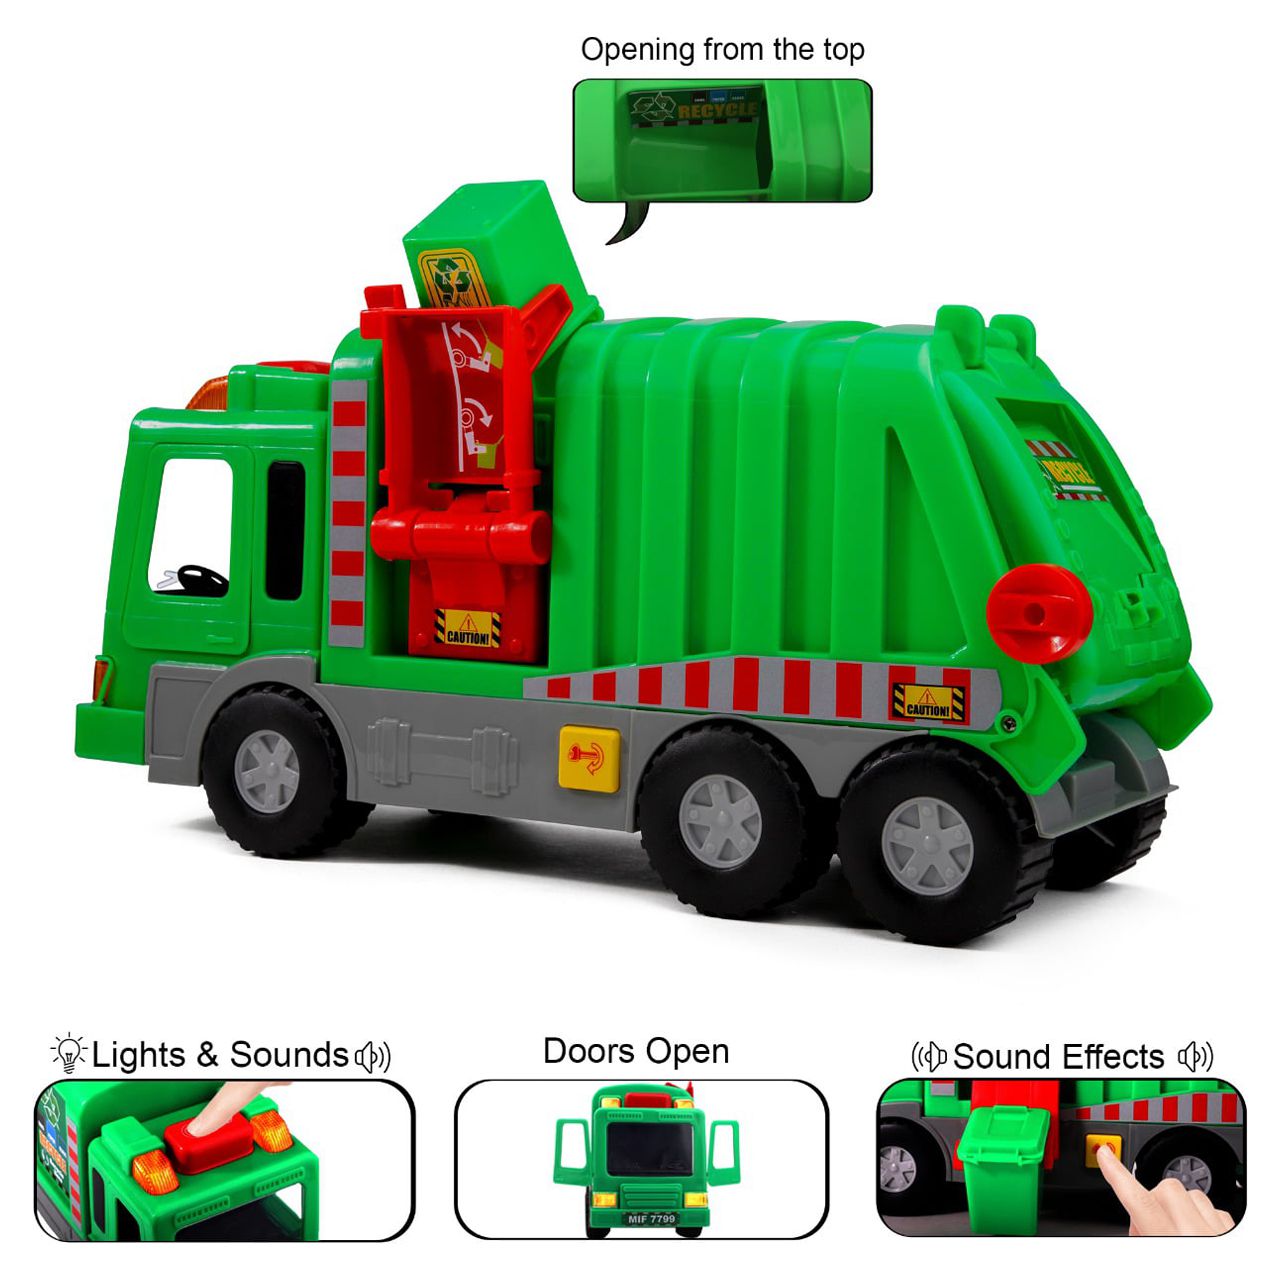 Playkidz Kids 15" Garbage Truck Toy with Lights, Sounds, and Manual Trash Lid, Interactive Early Learning Play for Kids, Indoor and Outdoor Safe, Heavy Duty Plastic - image 4 of 7